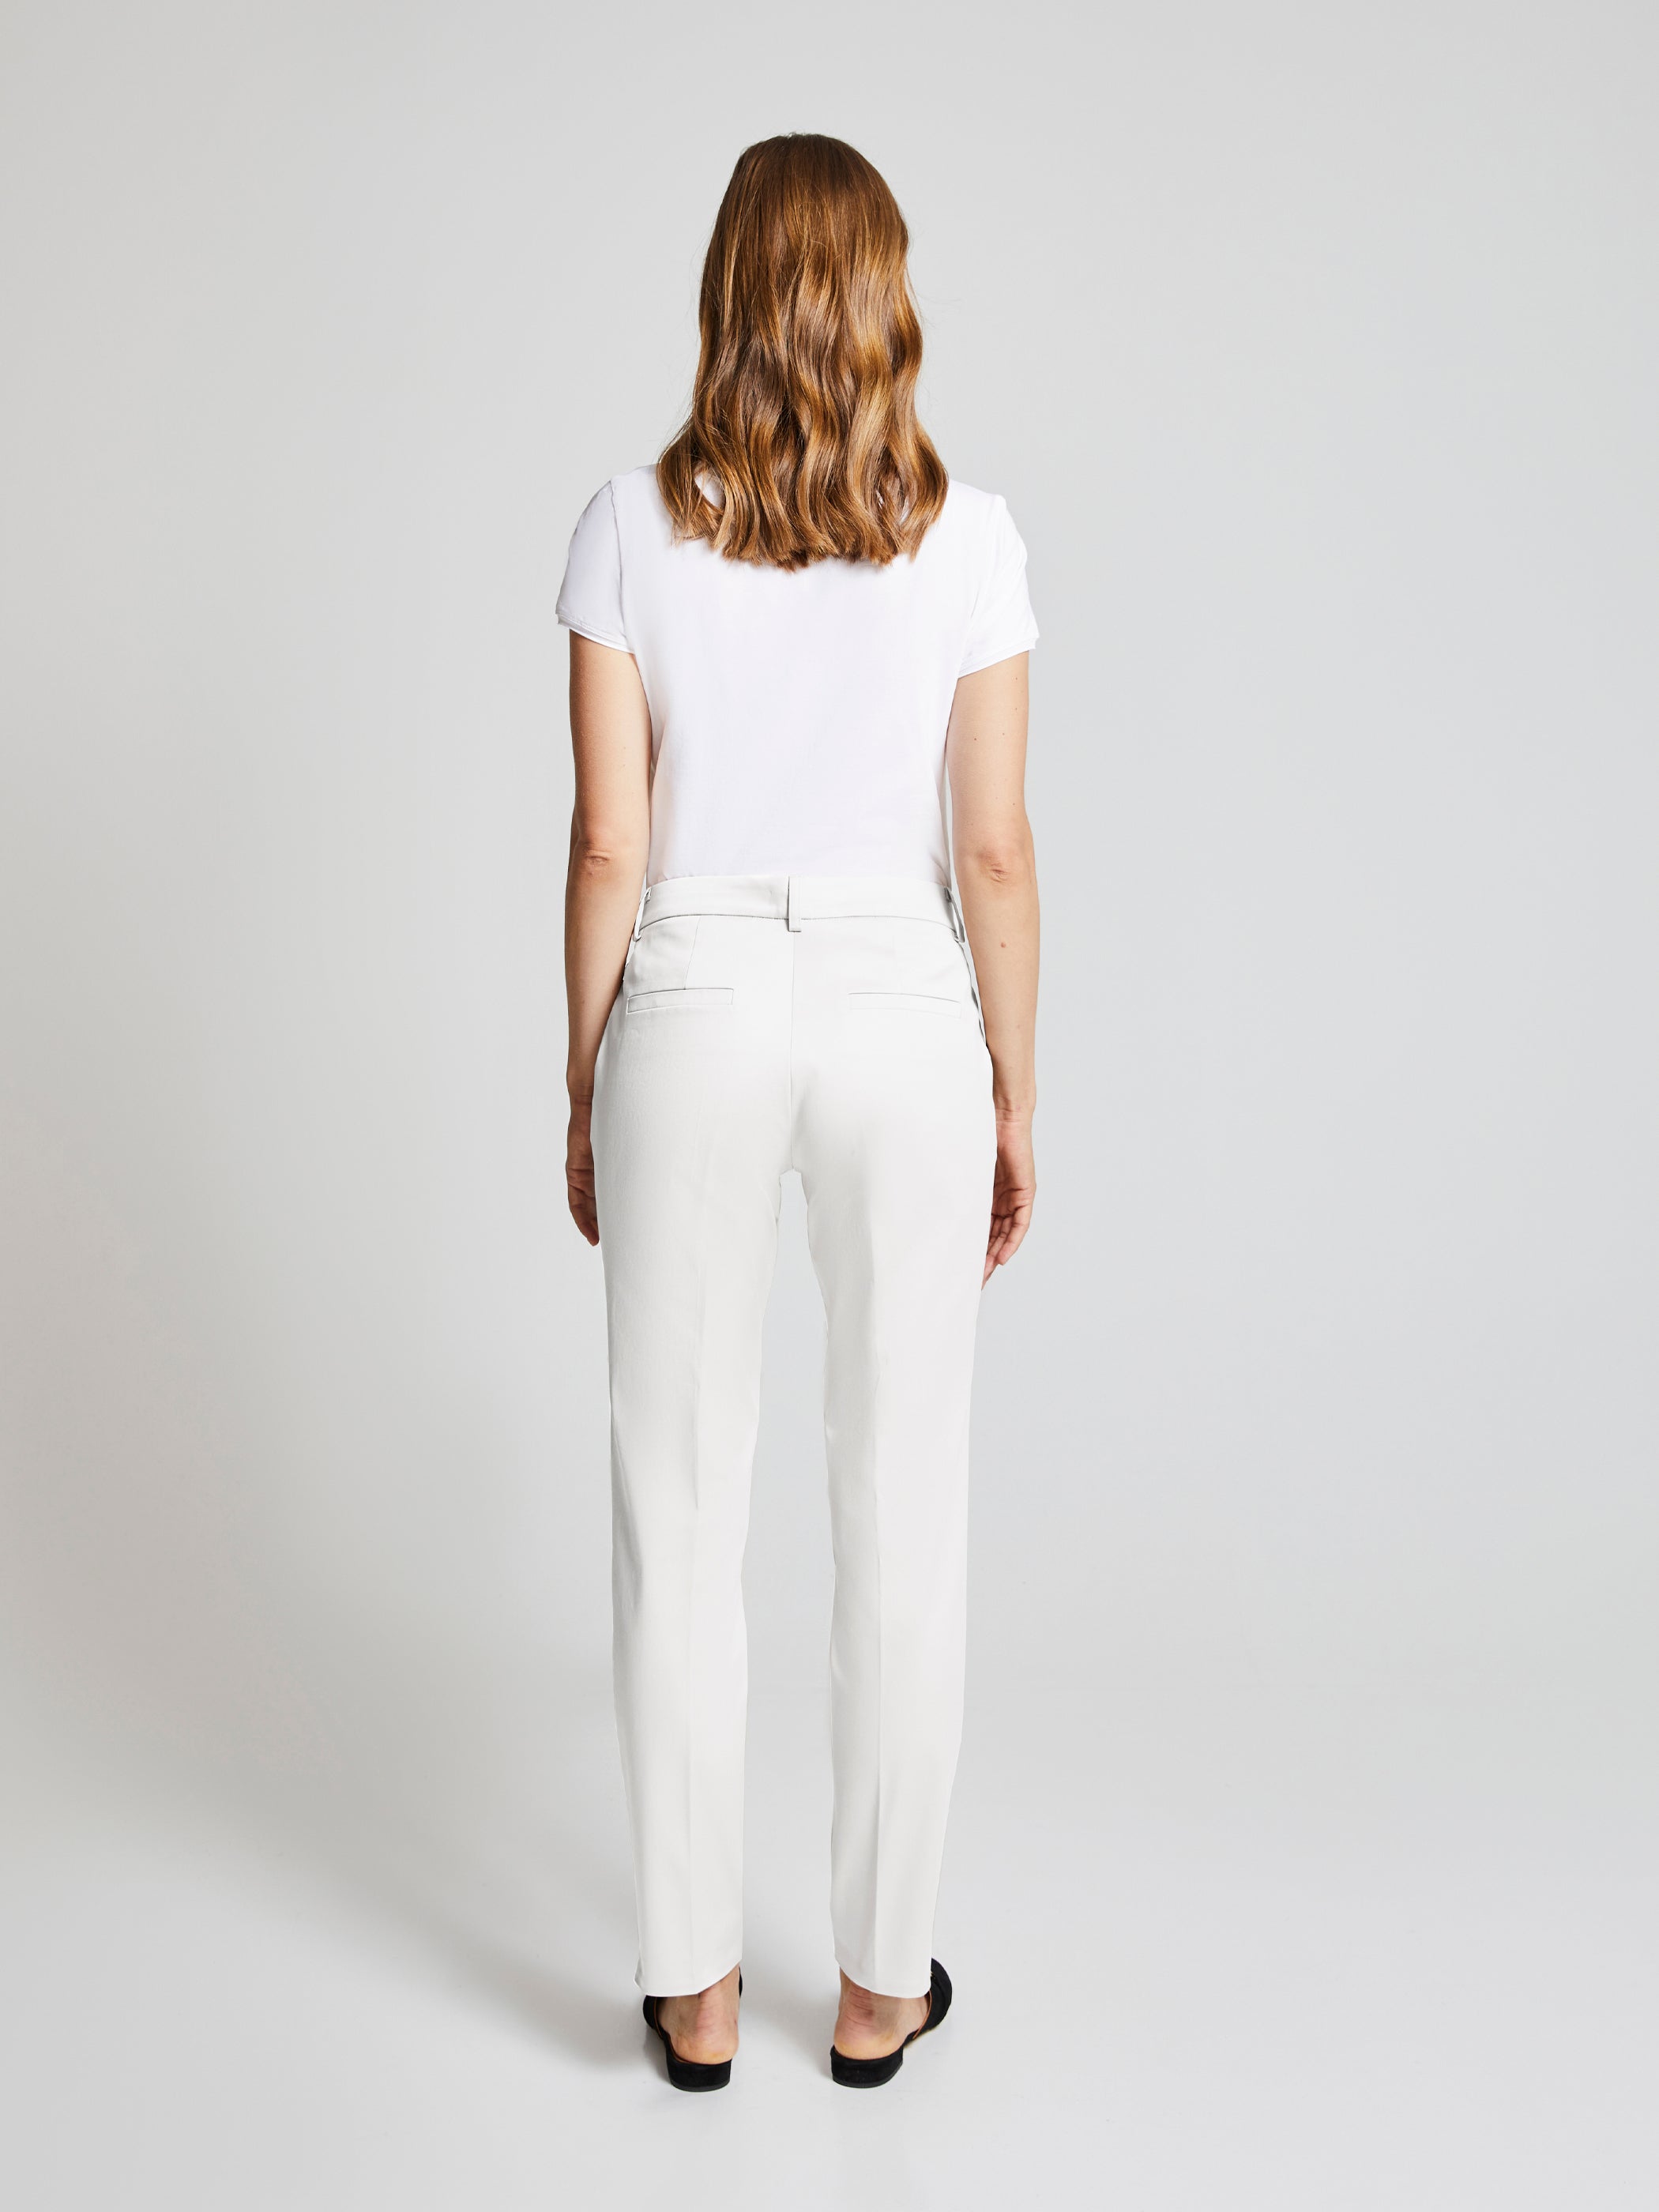 Jamy Jersey Trousers